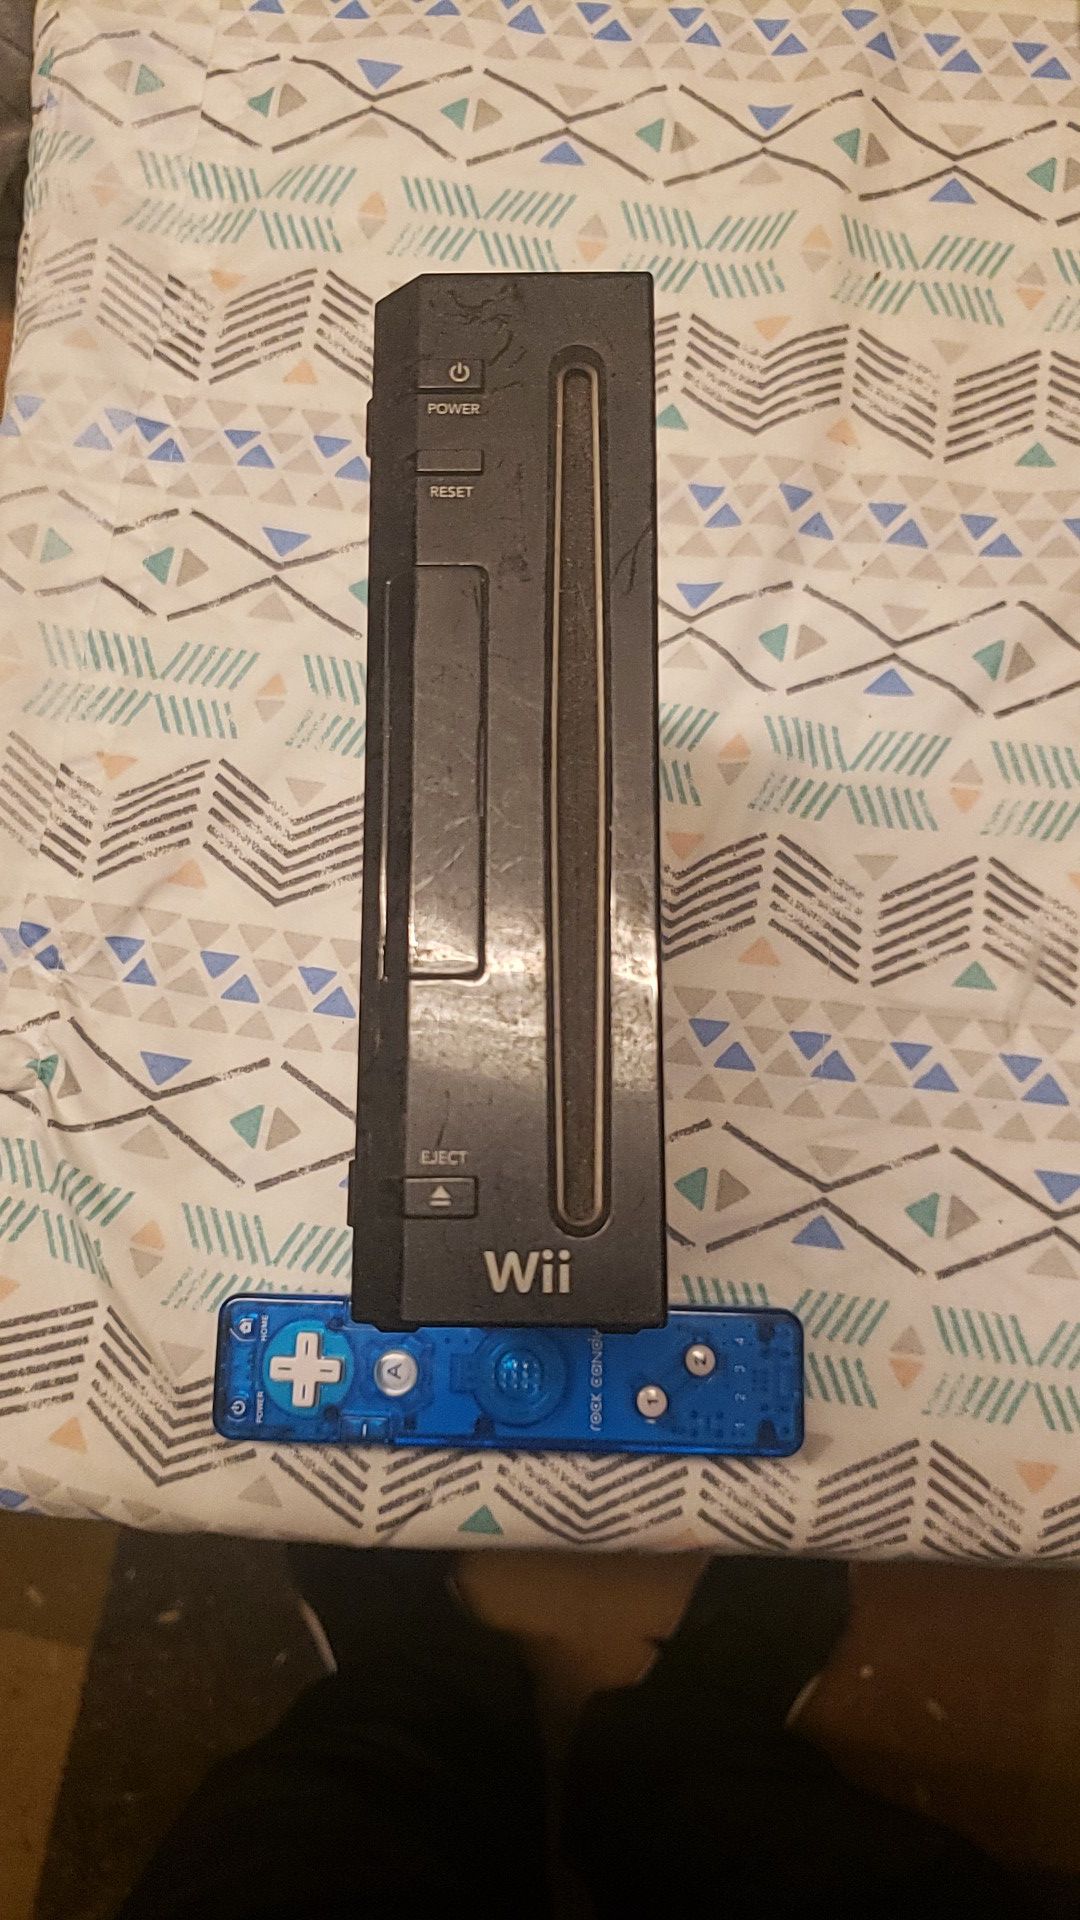 Wii and remote